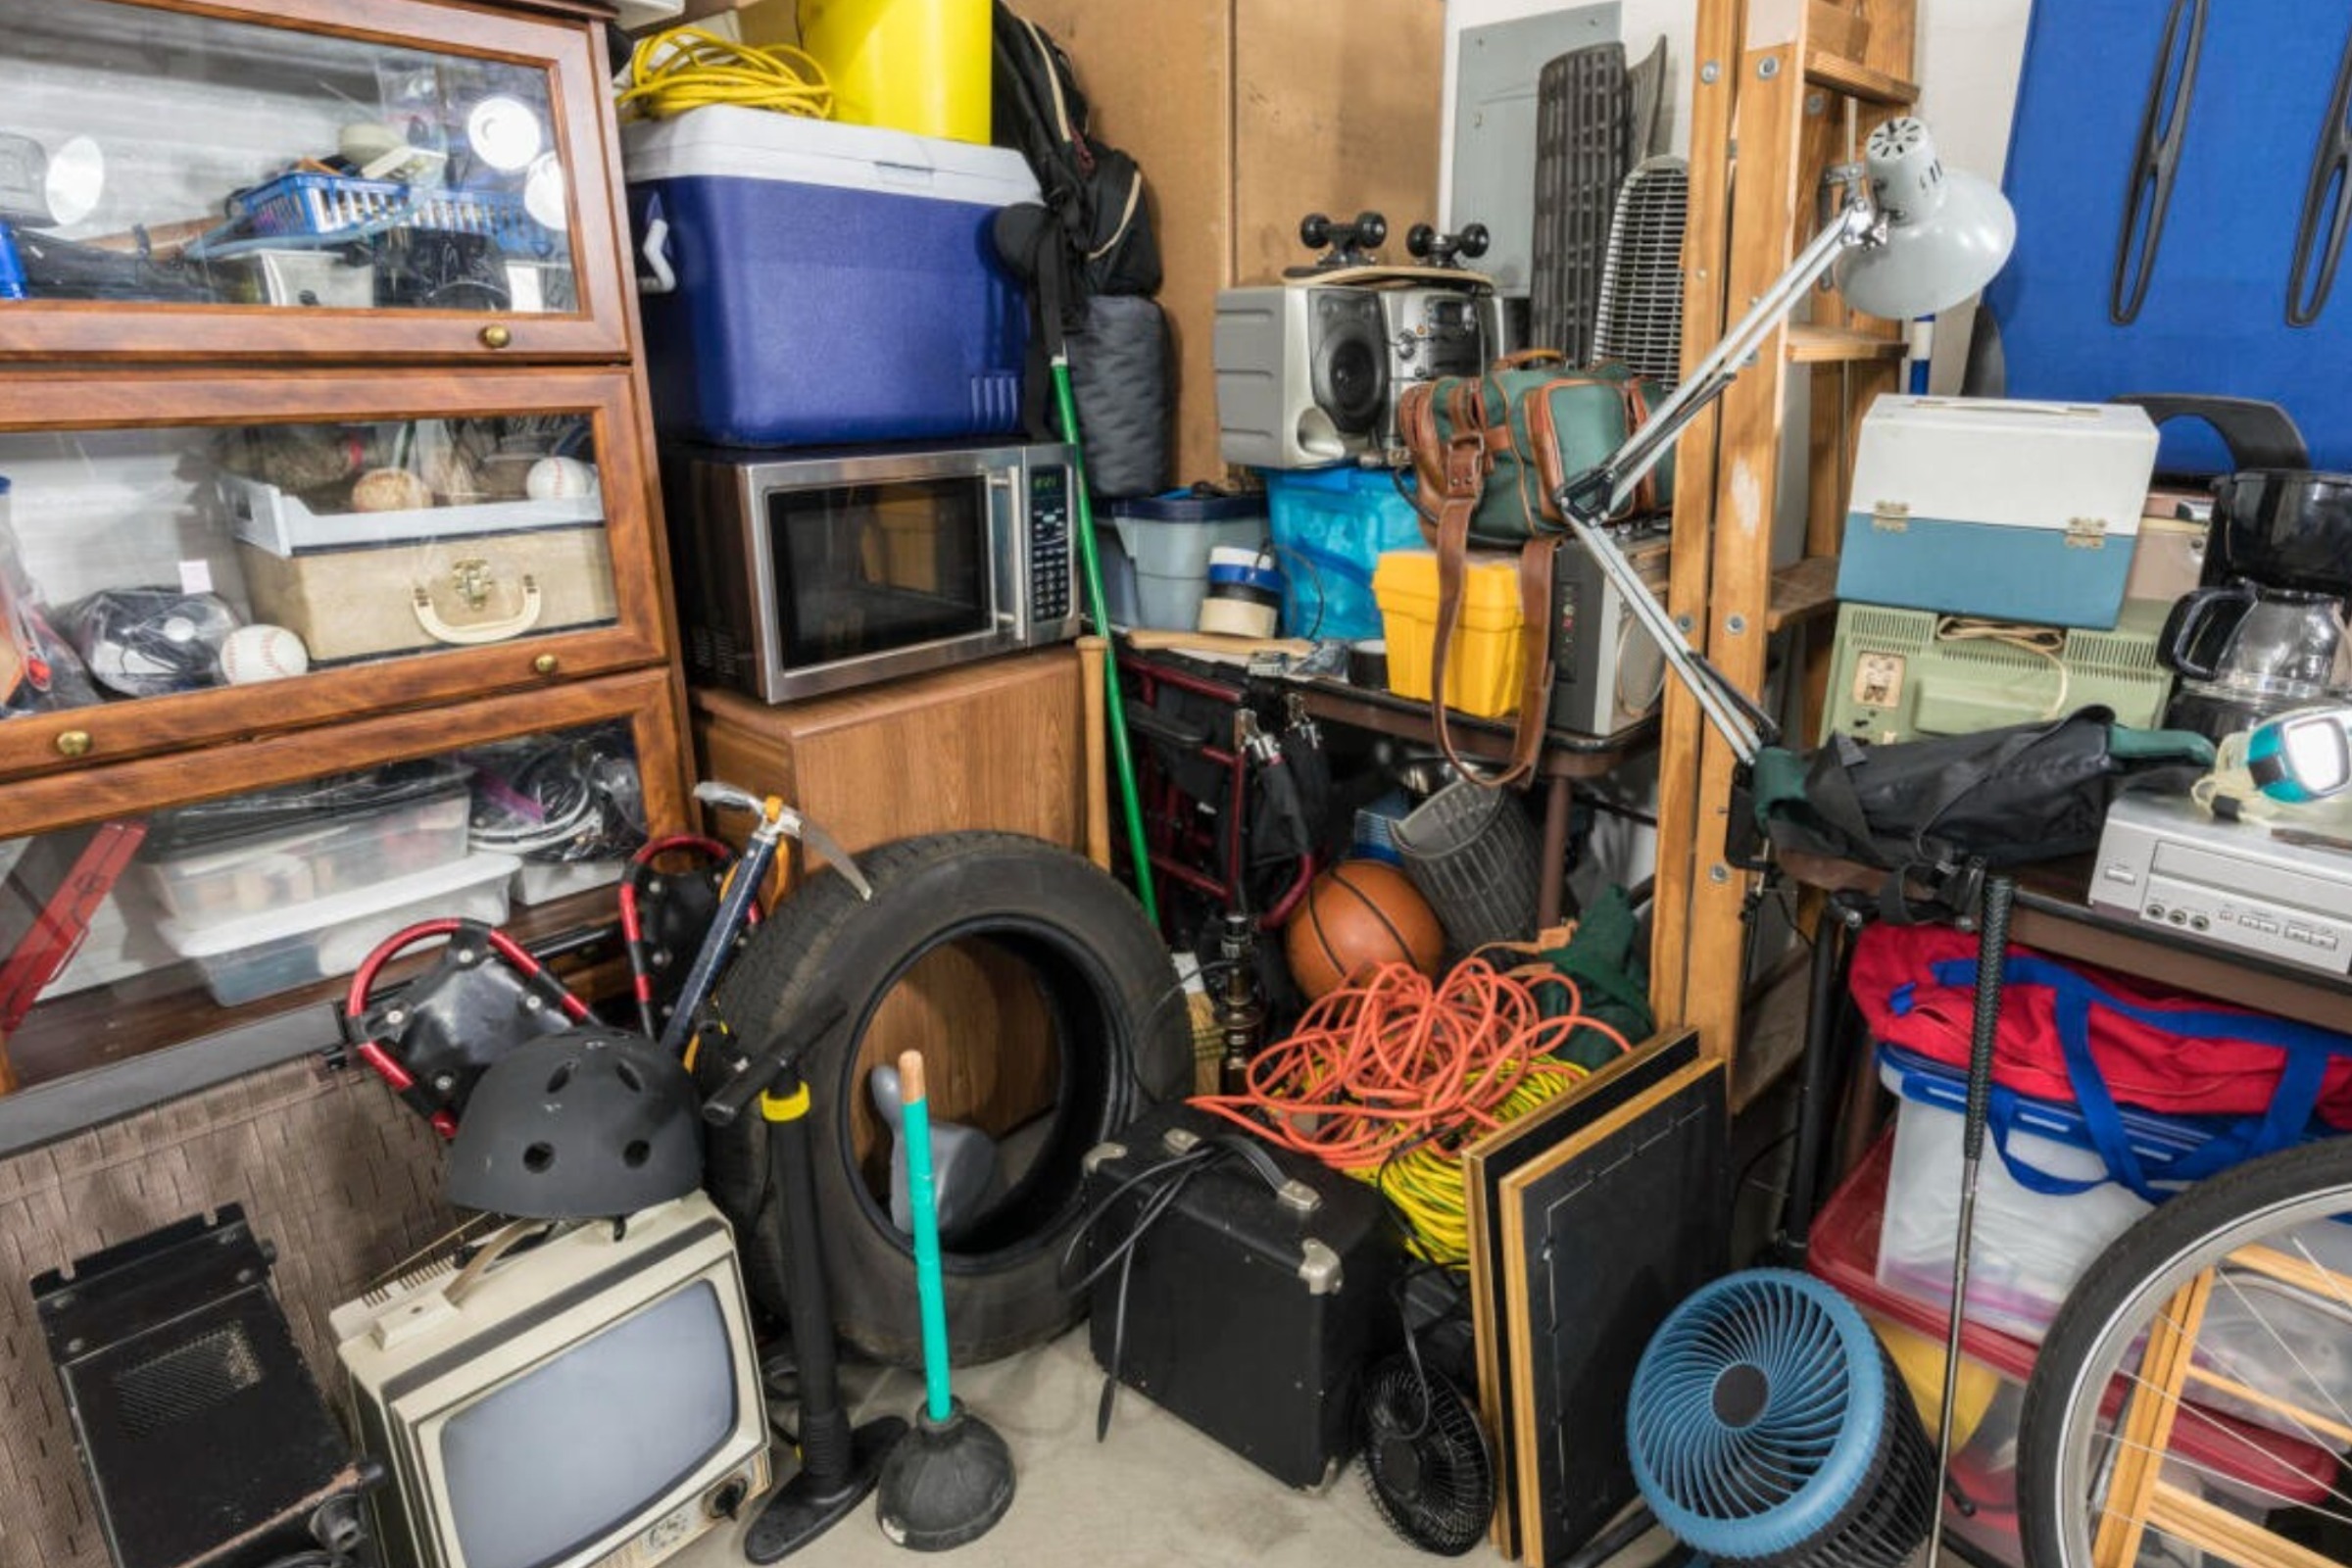 Garage overwhelmed with clutter, featuring boxes, old furniture, and various tools.